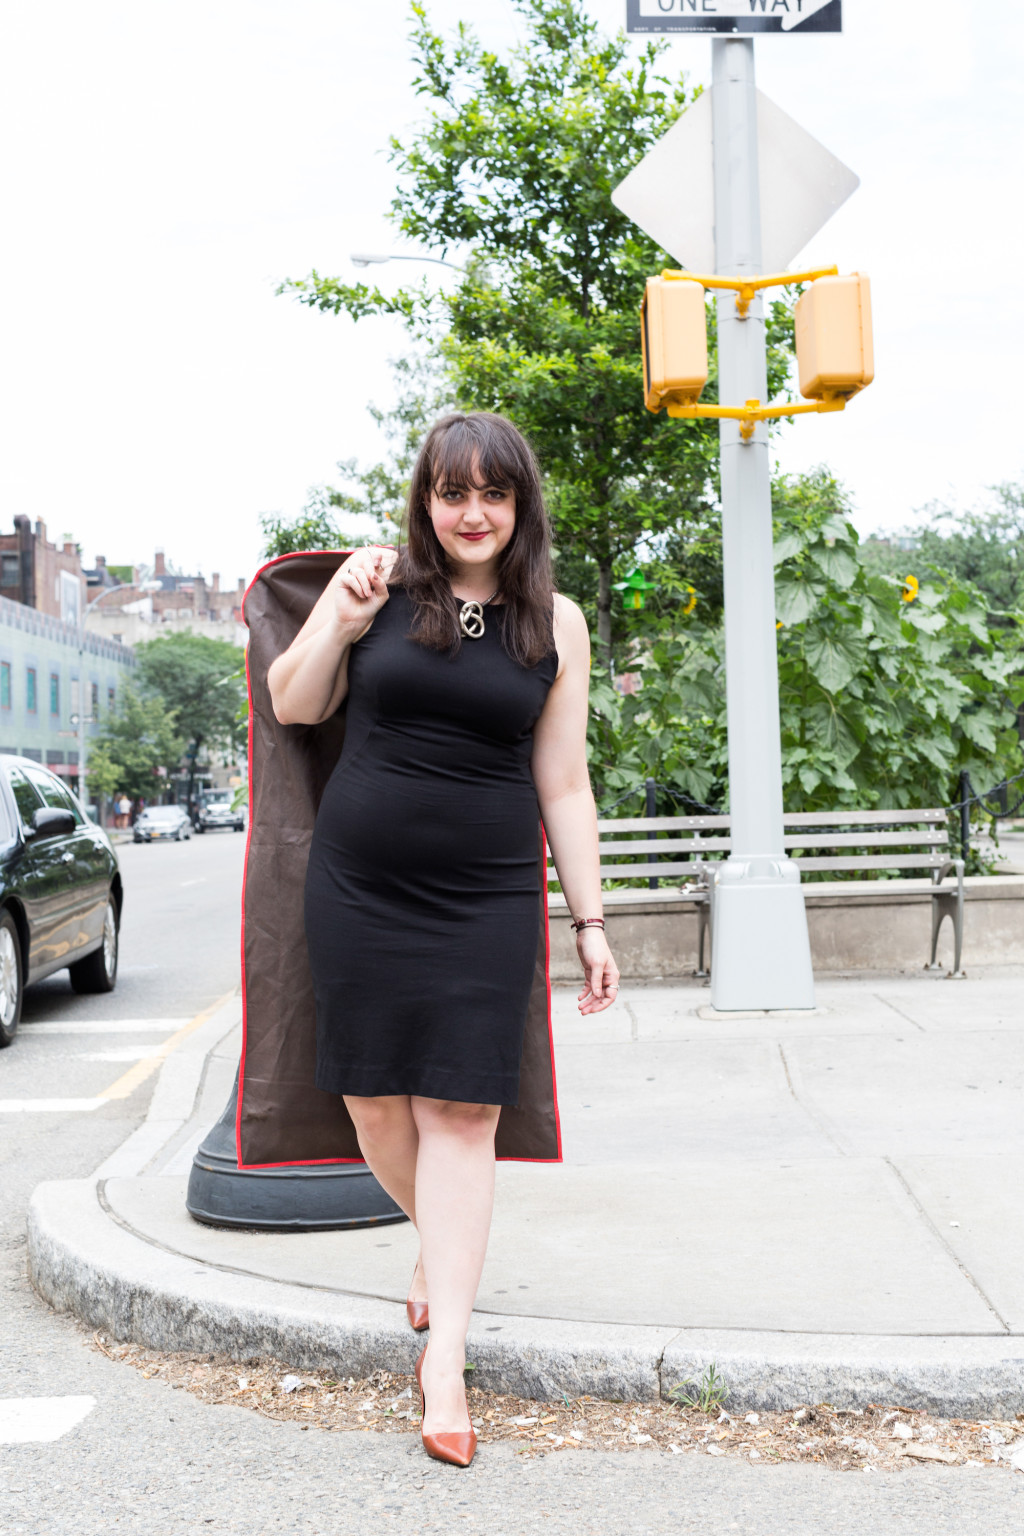 Emily in the Lydia dress // How to Find Your Size